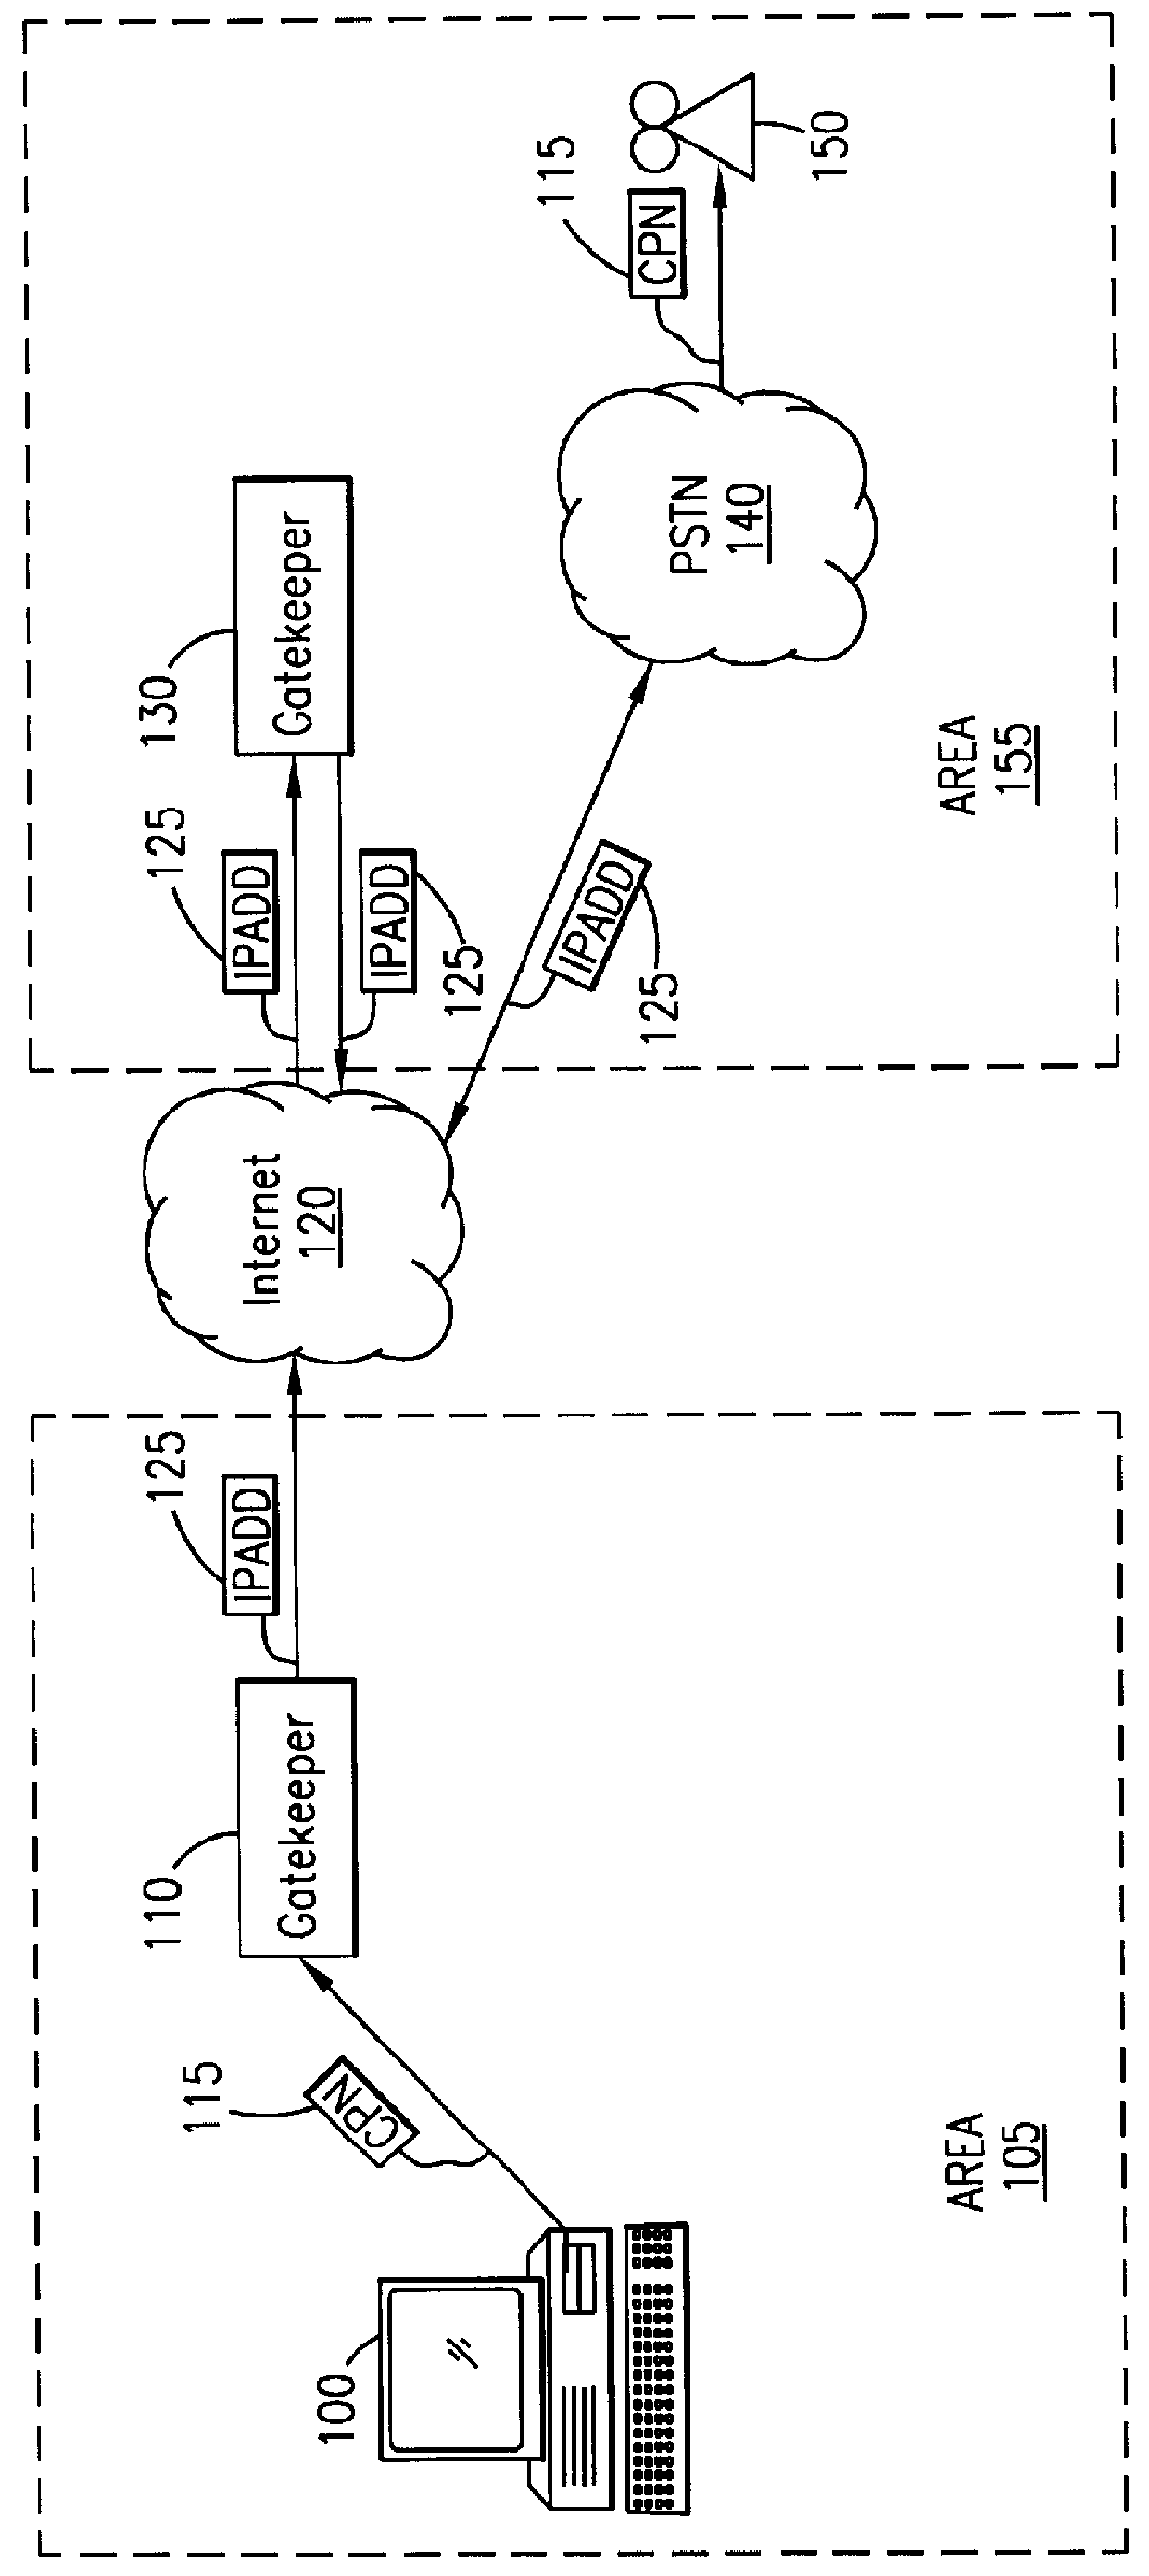 System and method for sending a short message containing purchase information to a destination terminal